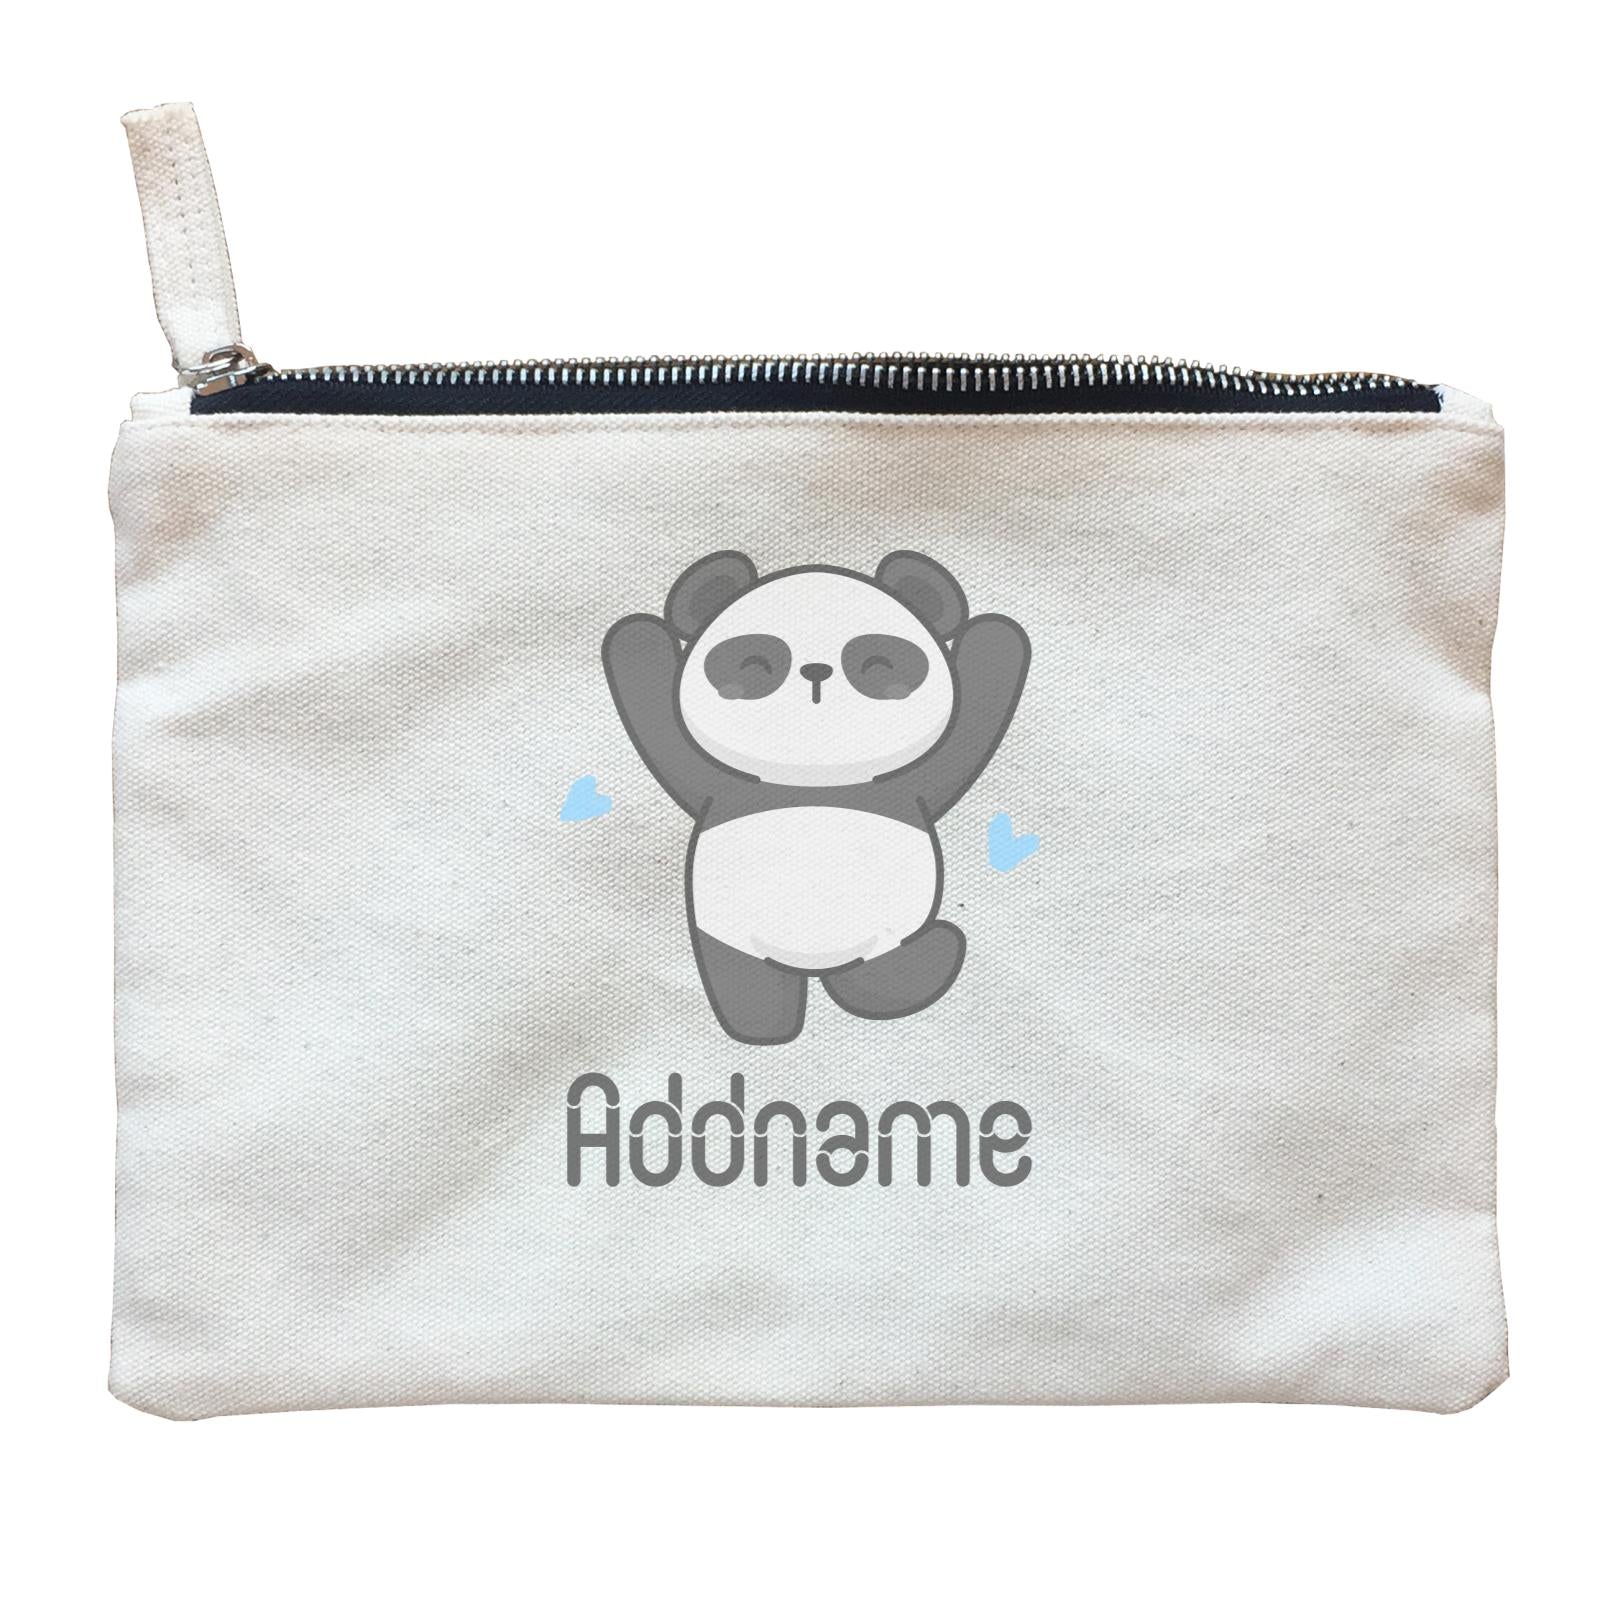 Cute Hand Drawn Style Panda Jumps with Joy Addname Zipper Pouch